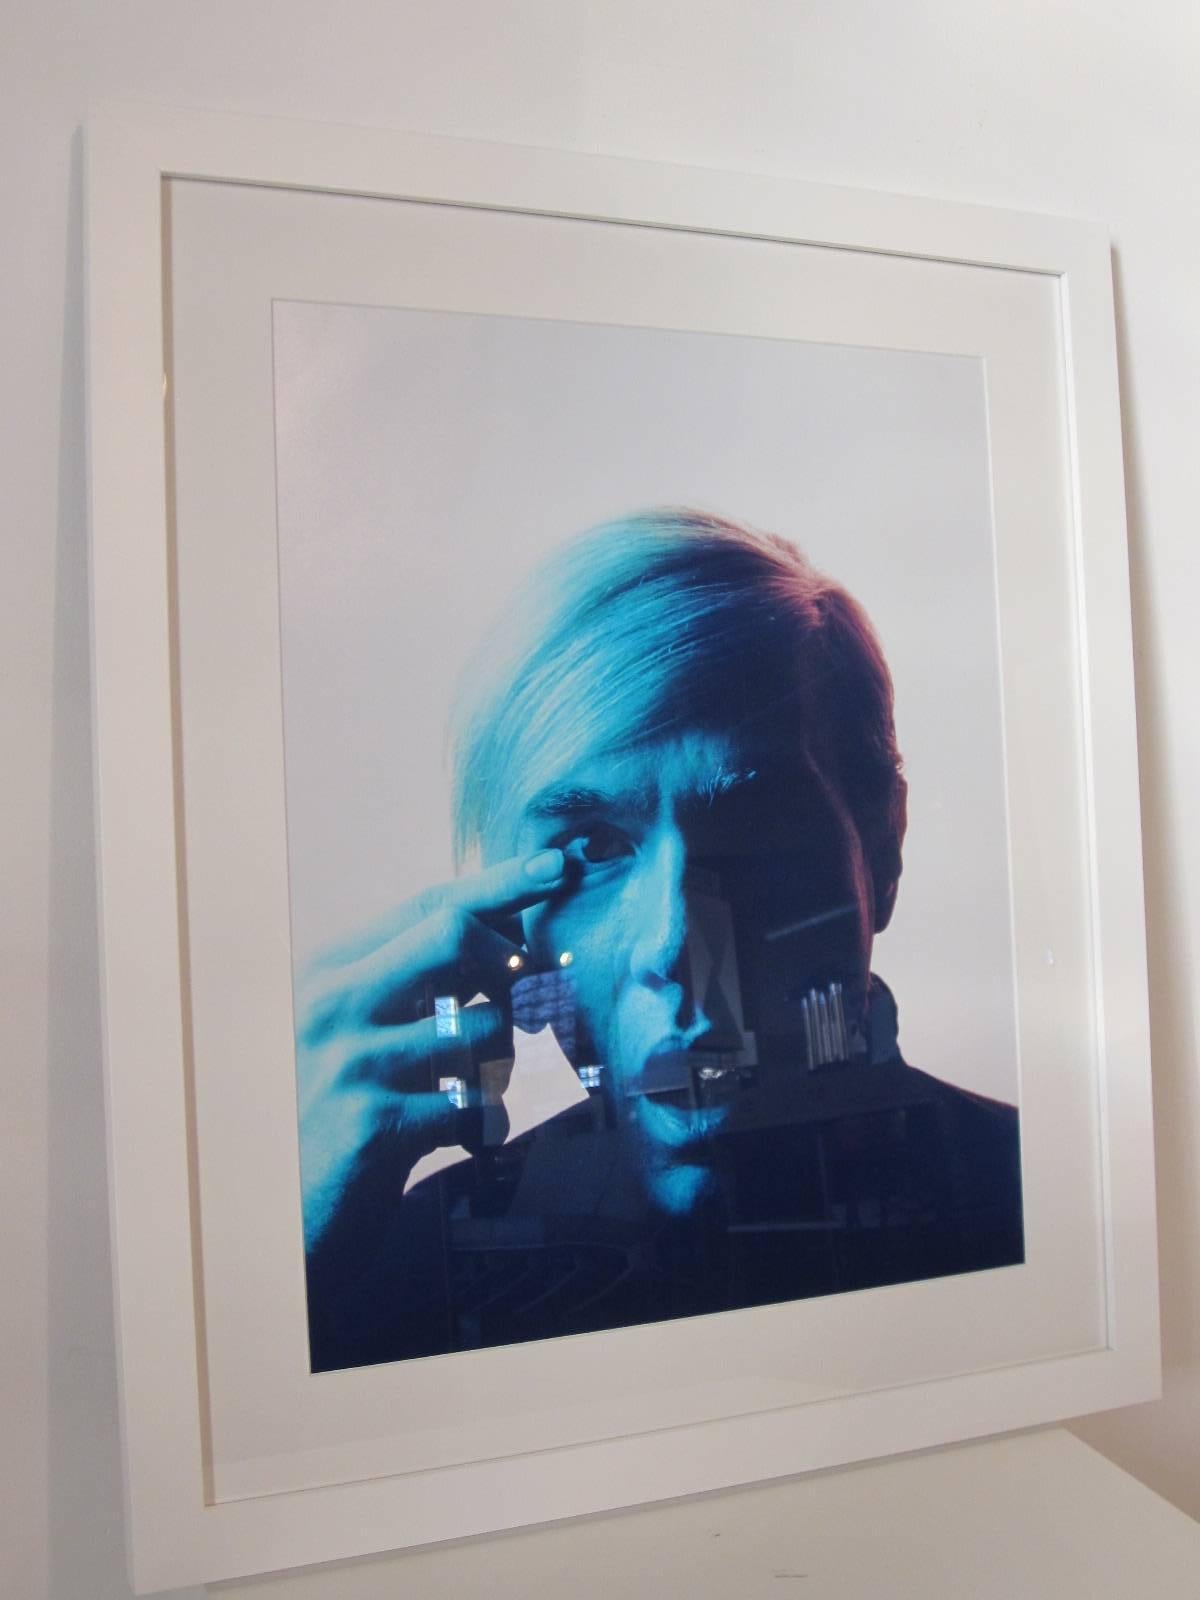 Andy Warhol portrait taken in 1968 by master photographer and printer Philippe Halsman (1906-1979) and in 1989 an edition of 100 portfolio of eight color chromogenic prints were done which sold out. This print is a proof from the artist galley